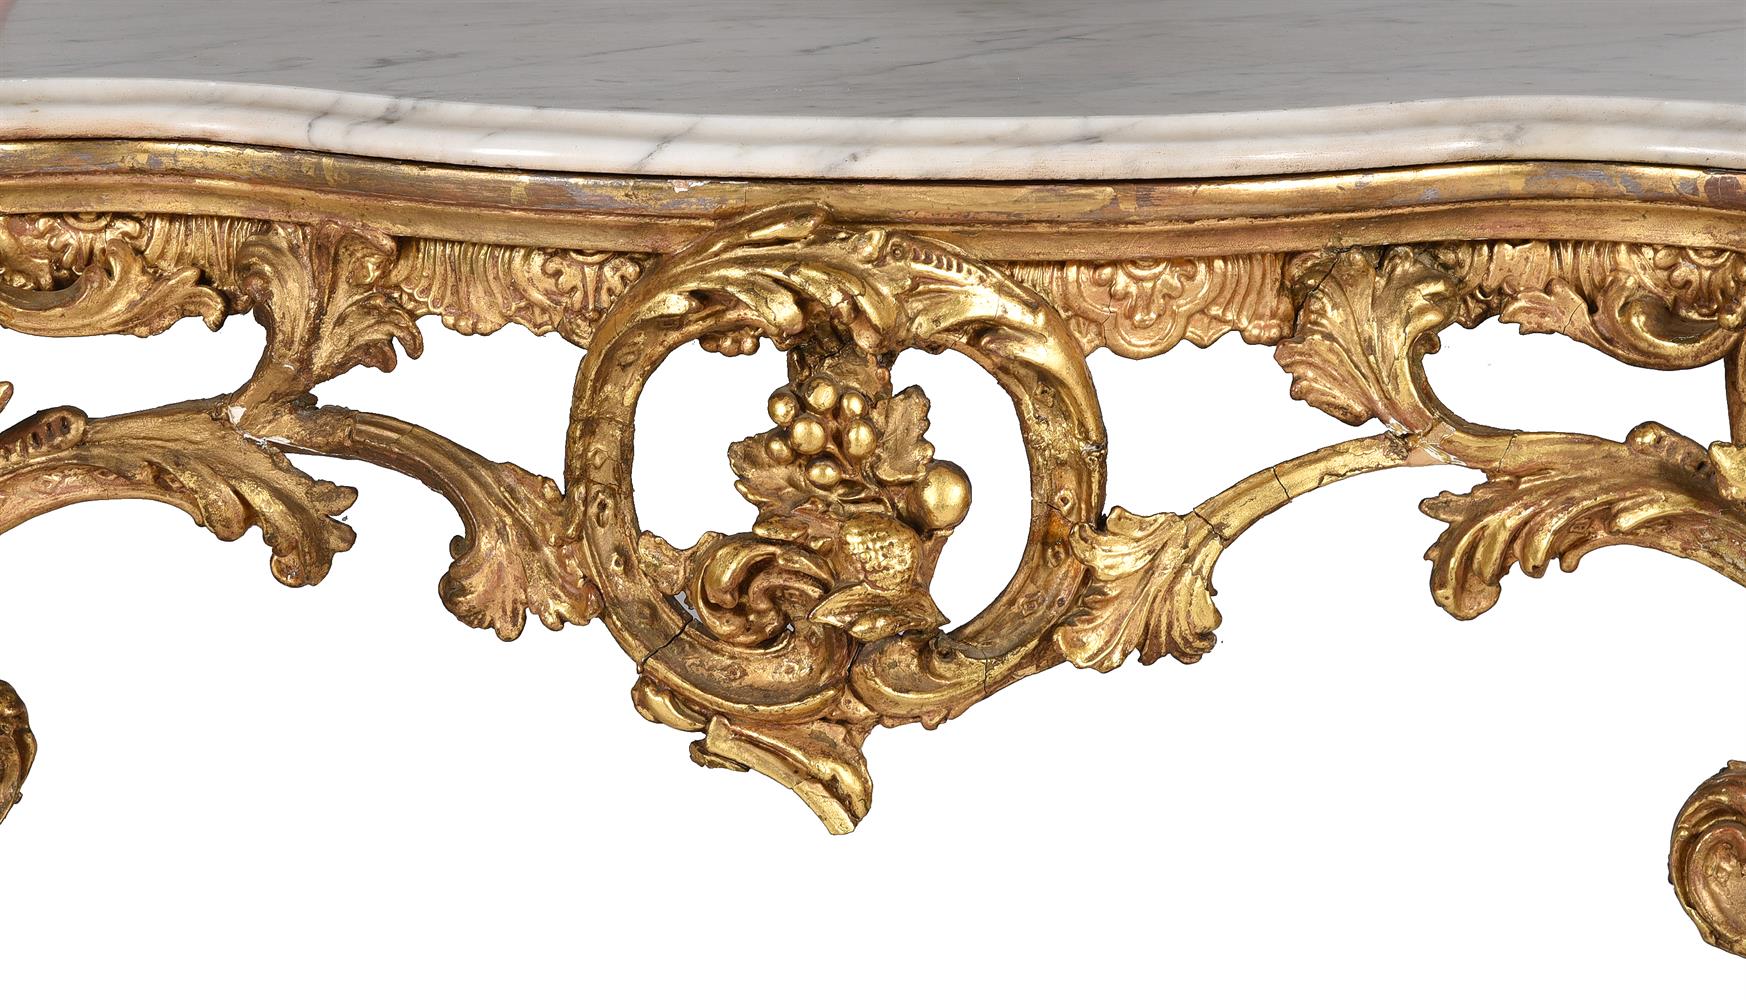 A PAIR OF LOUIS XV STYLE GILTWOOD AND GESSO CONSOLE TABLES, FIRST HALF 19TH CENTURY - Image 8 of 13